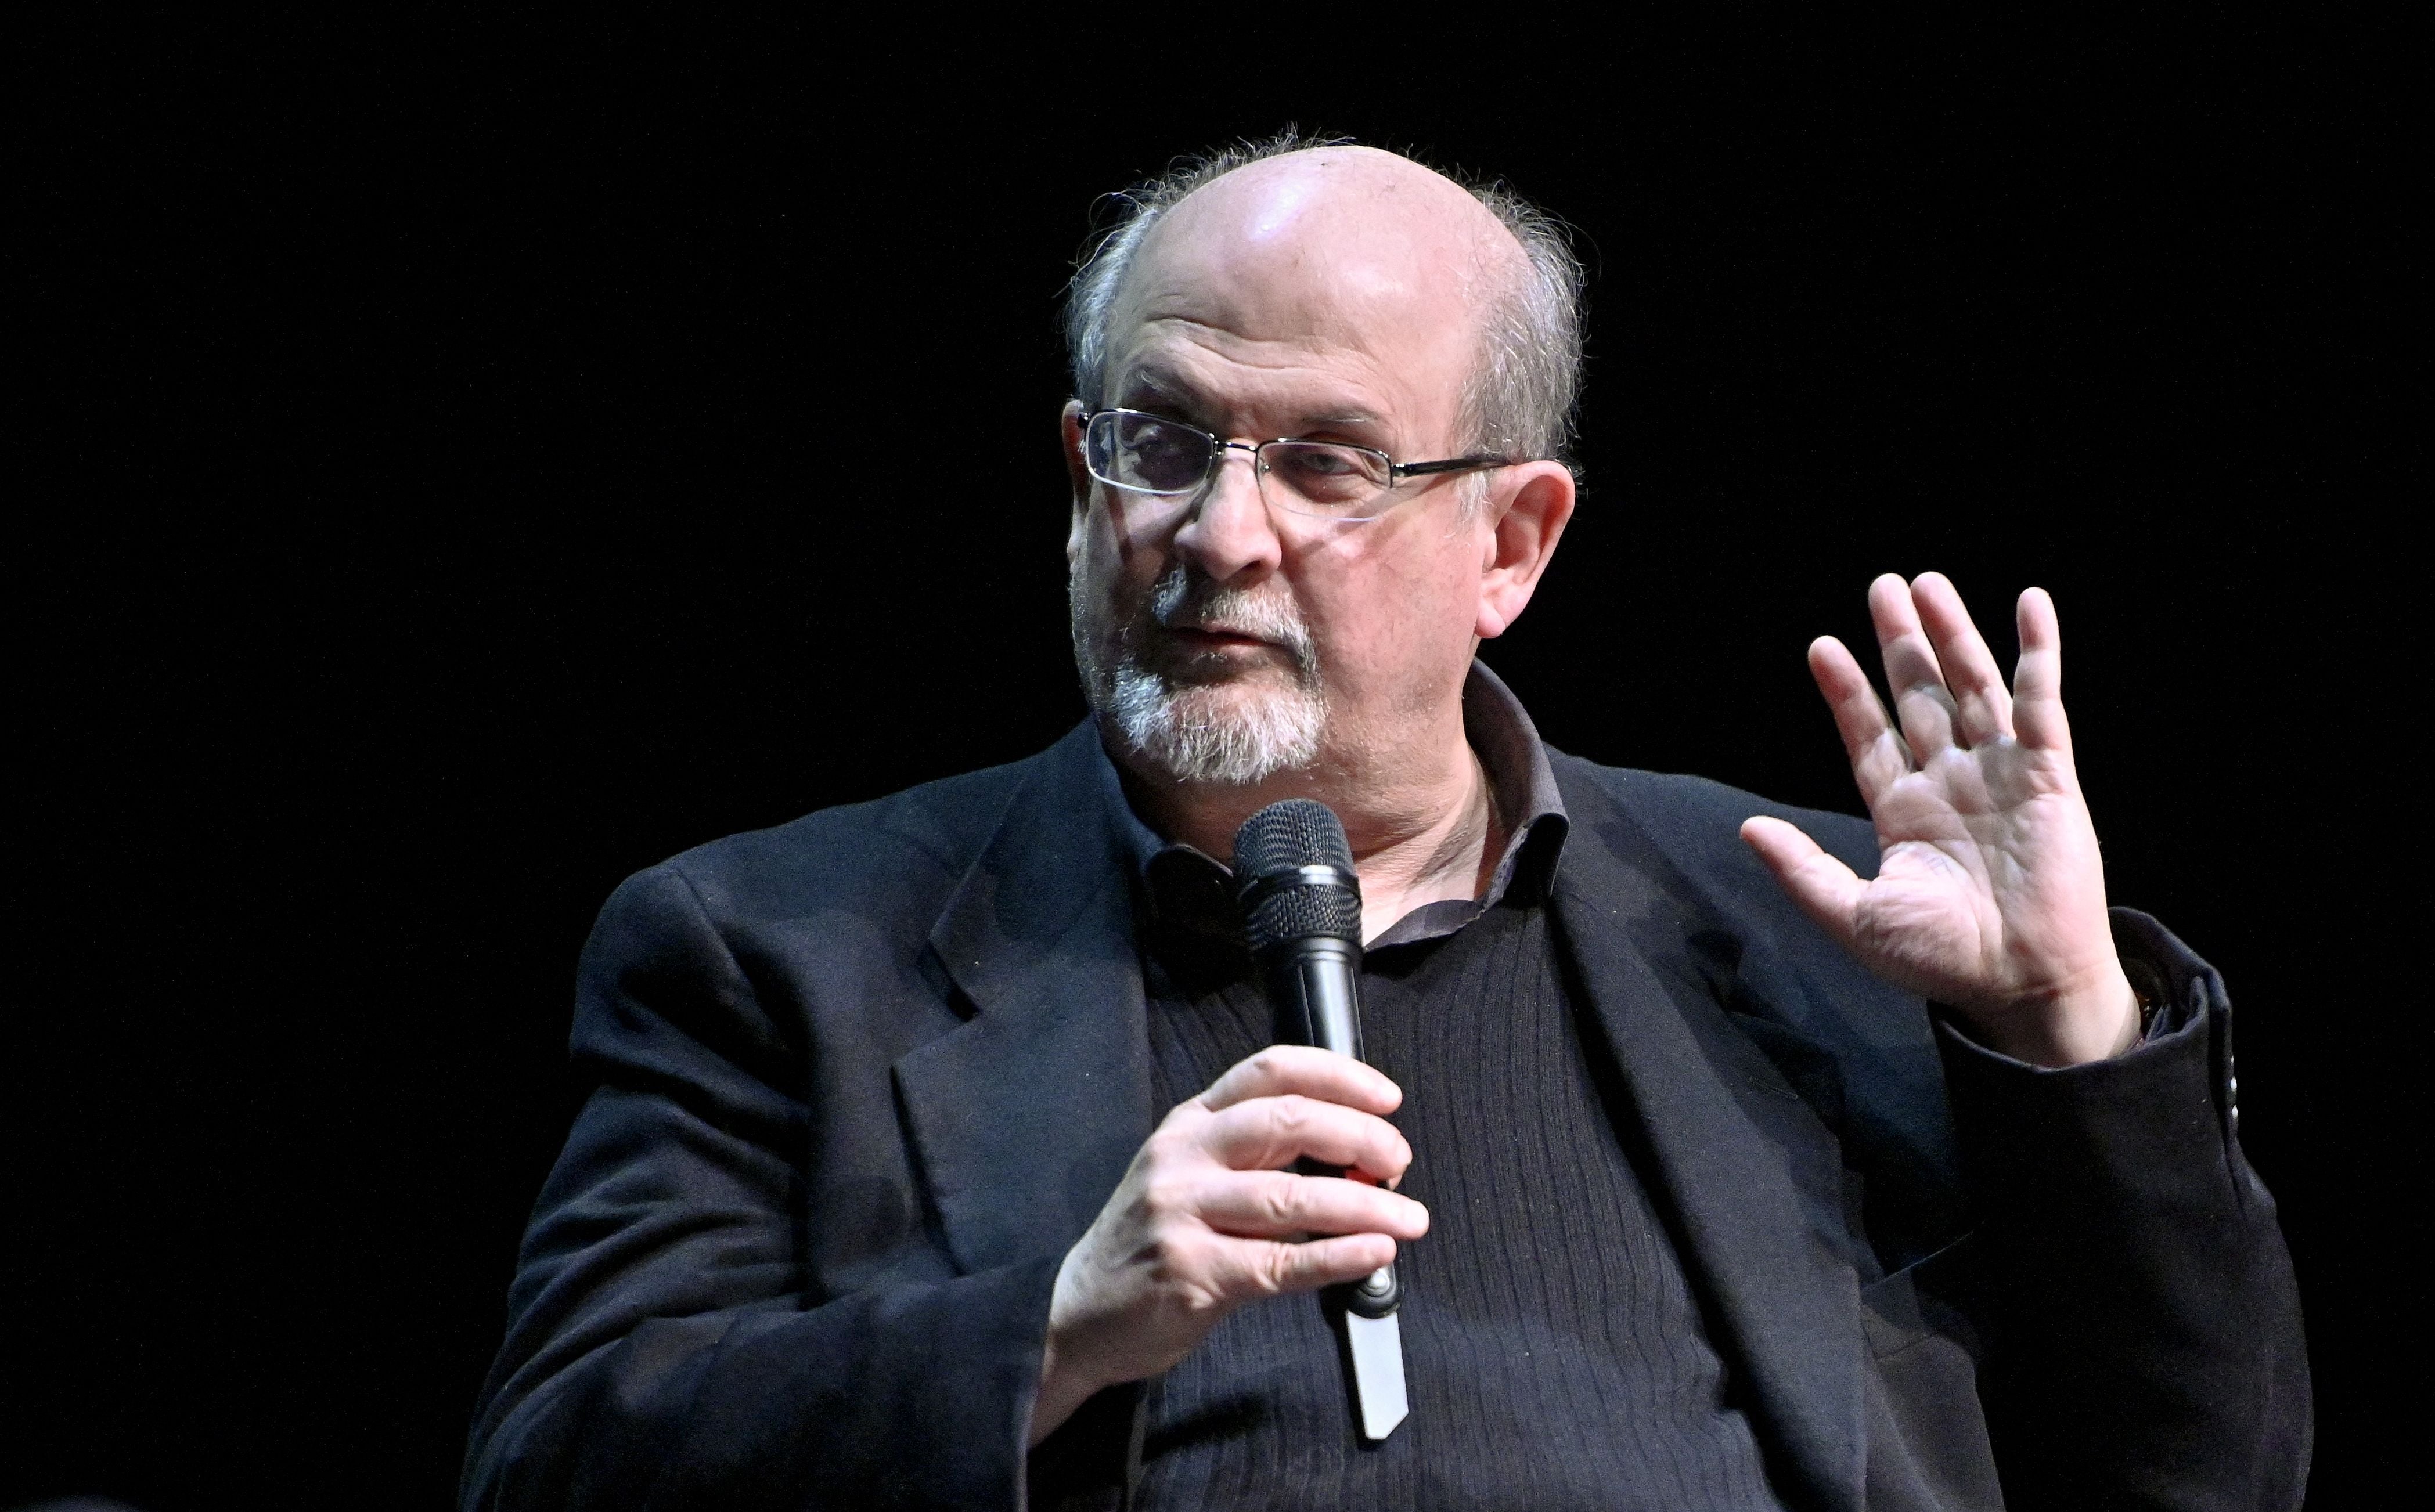 British author Salman Rushdie has continued to speak out despite the threat hanging over him